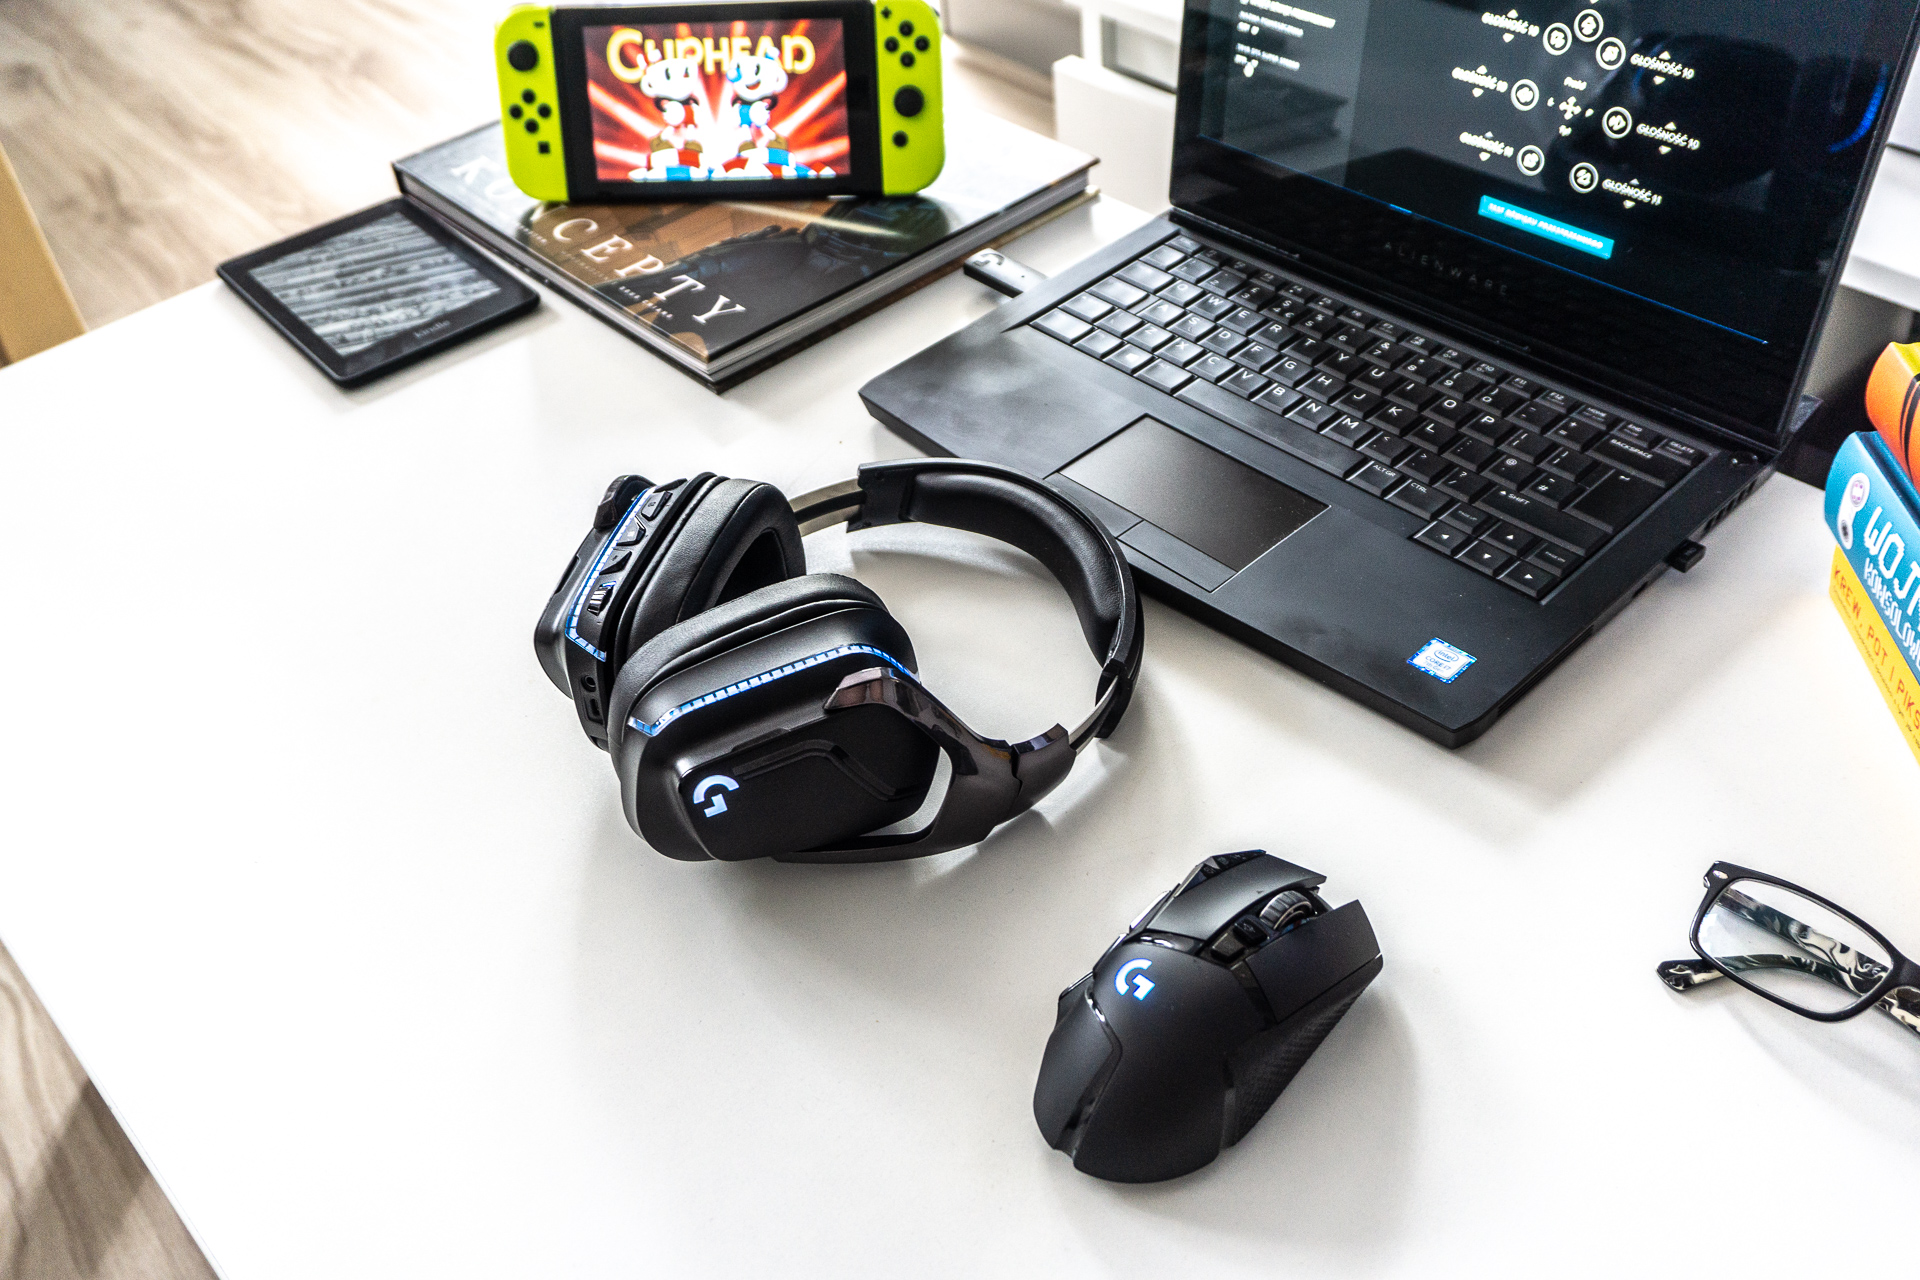 Logitech G935 is spatial champ in an old crackling casing - review